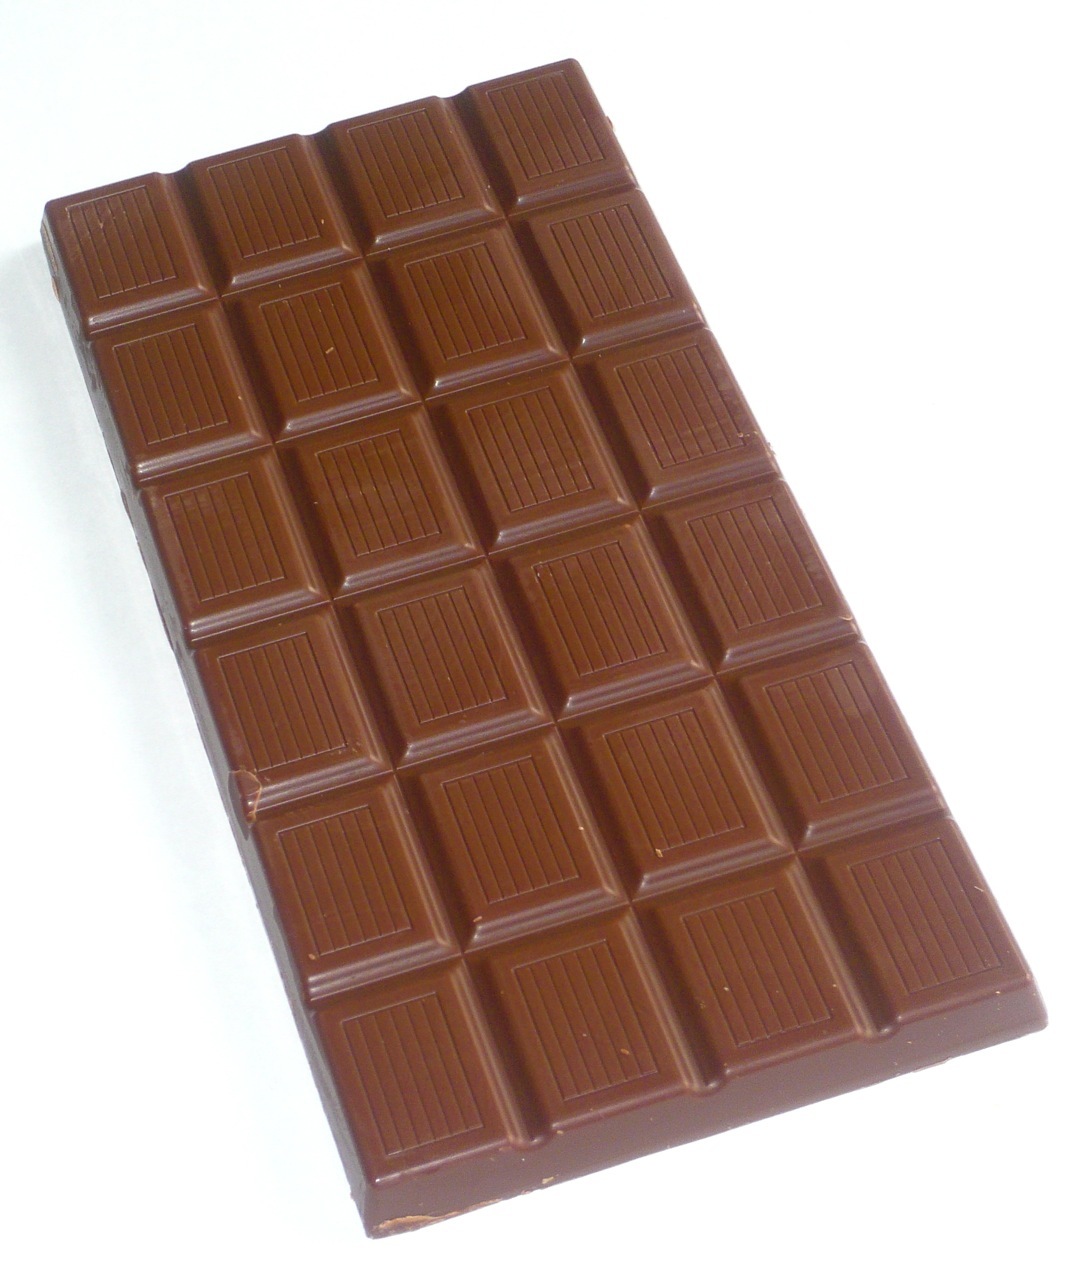 What kind of chocolate do you prefer? Personality Test